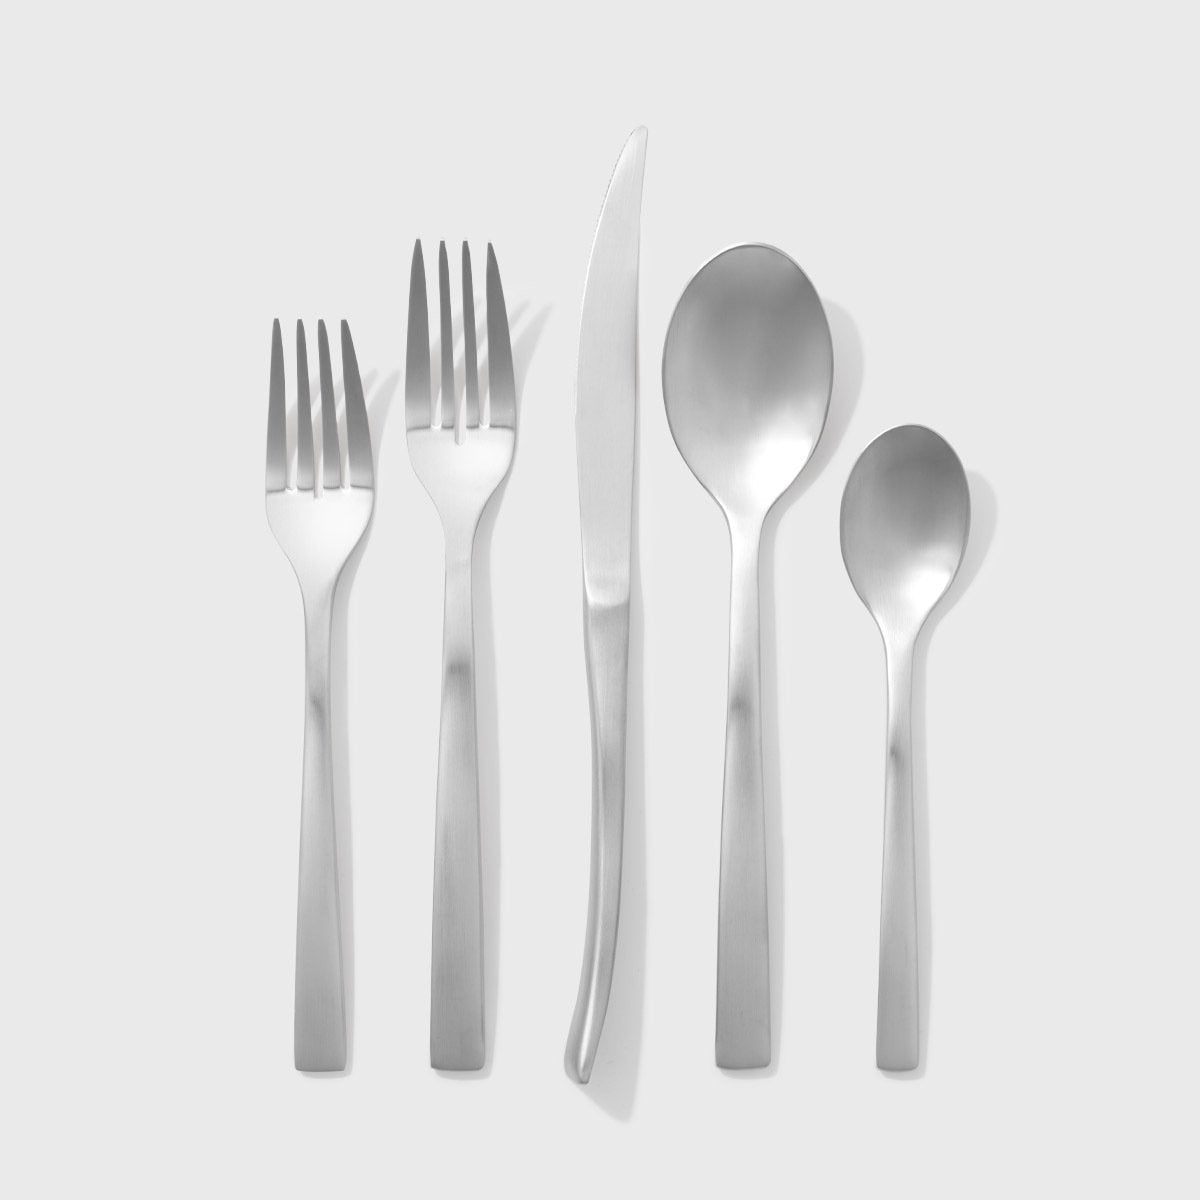 Member's Mark Premium Forged 20 Piece Stainless Steel Flatware Set